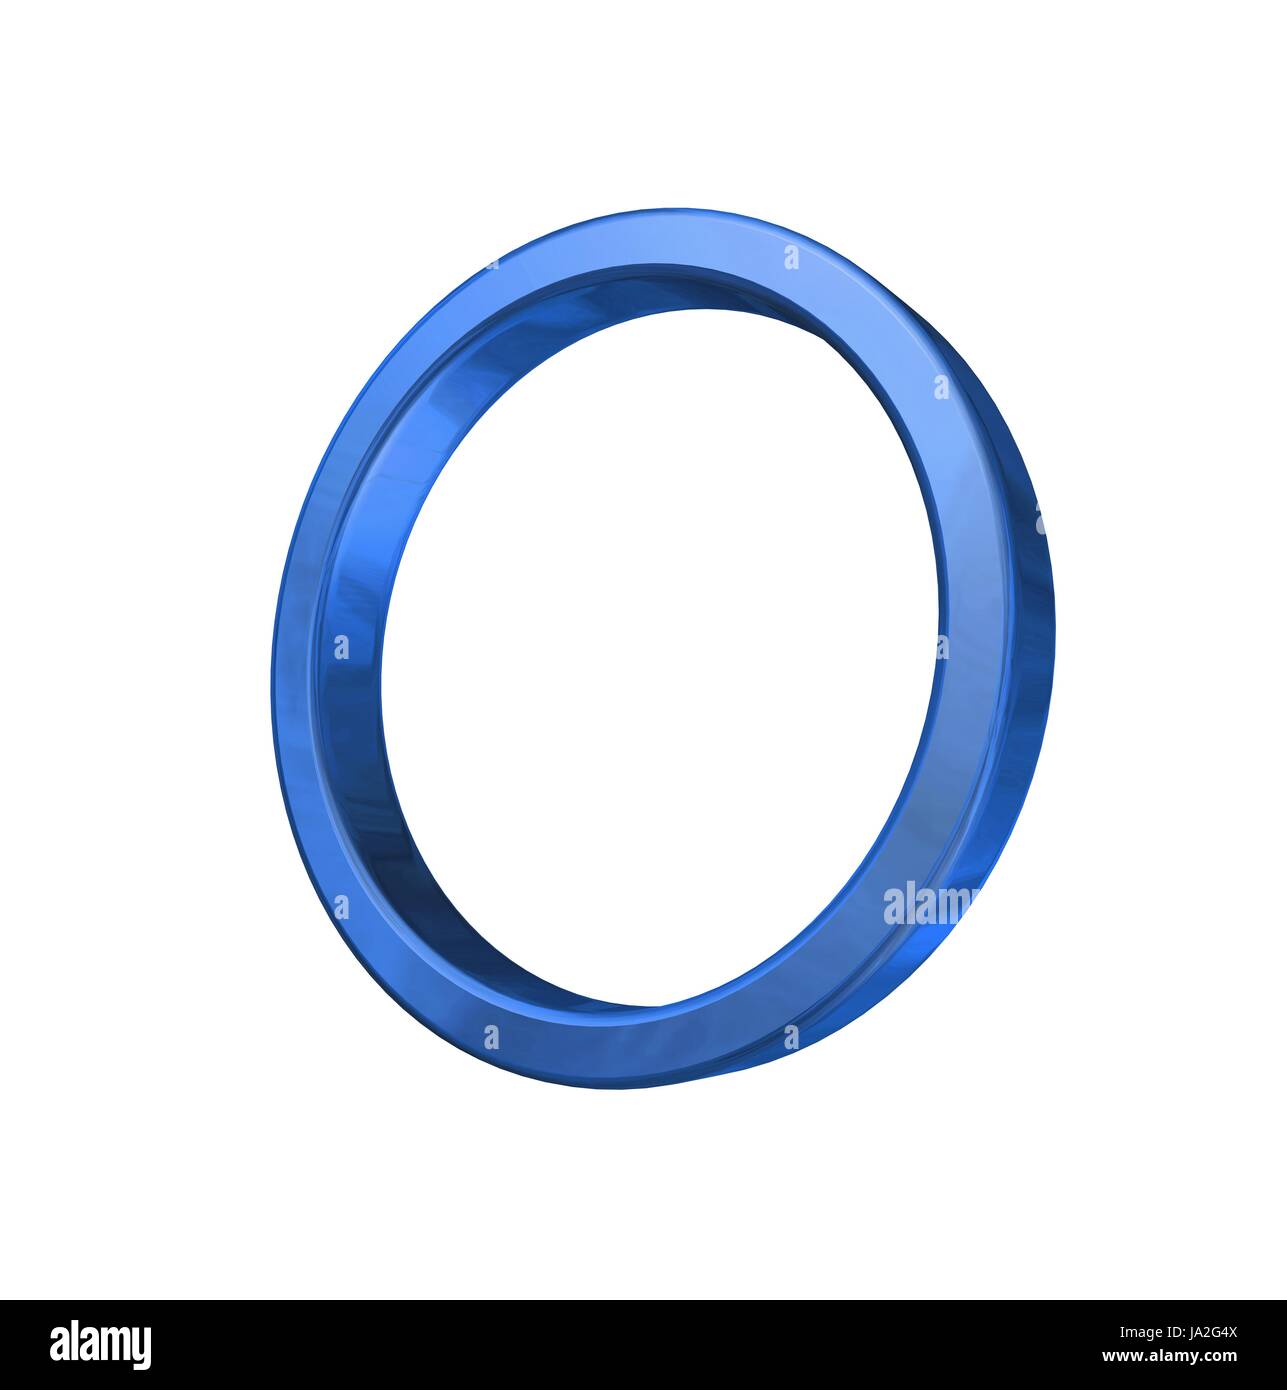 3d Illustrations of rings Stock Photo - Alamy